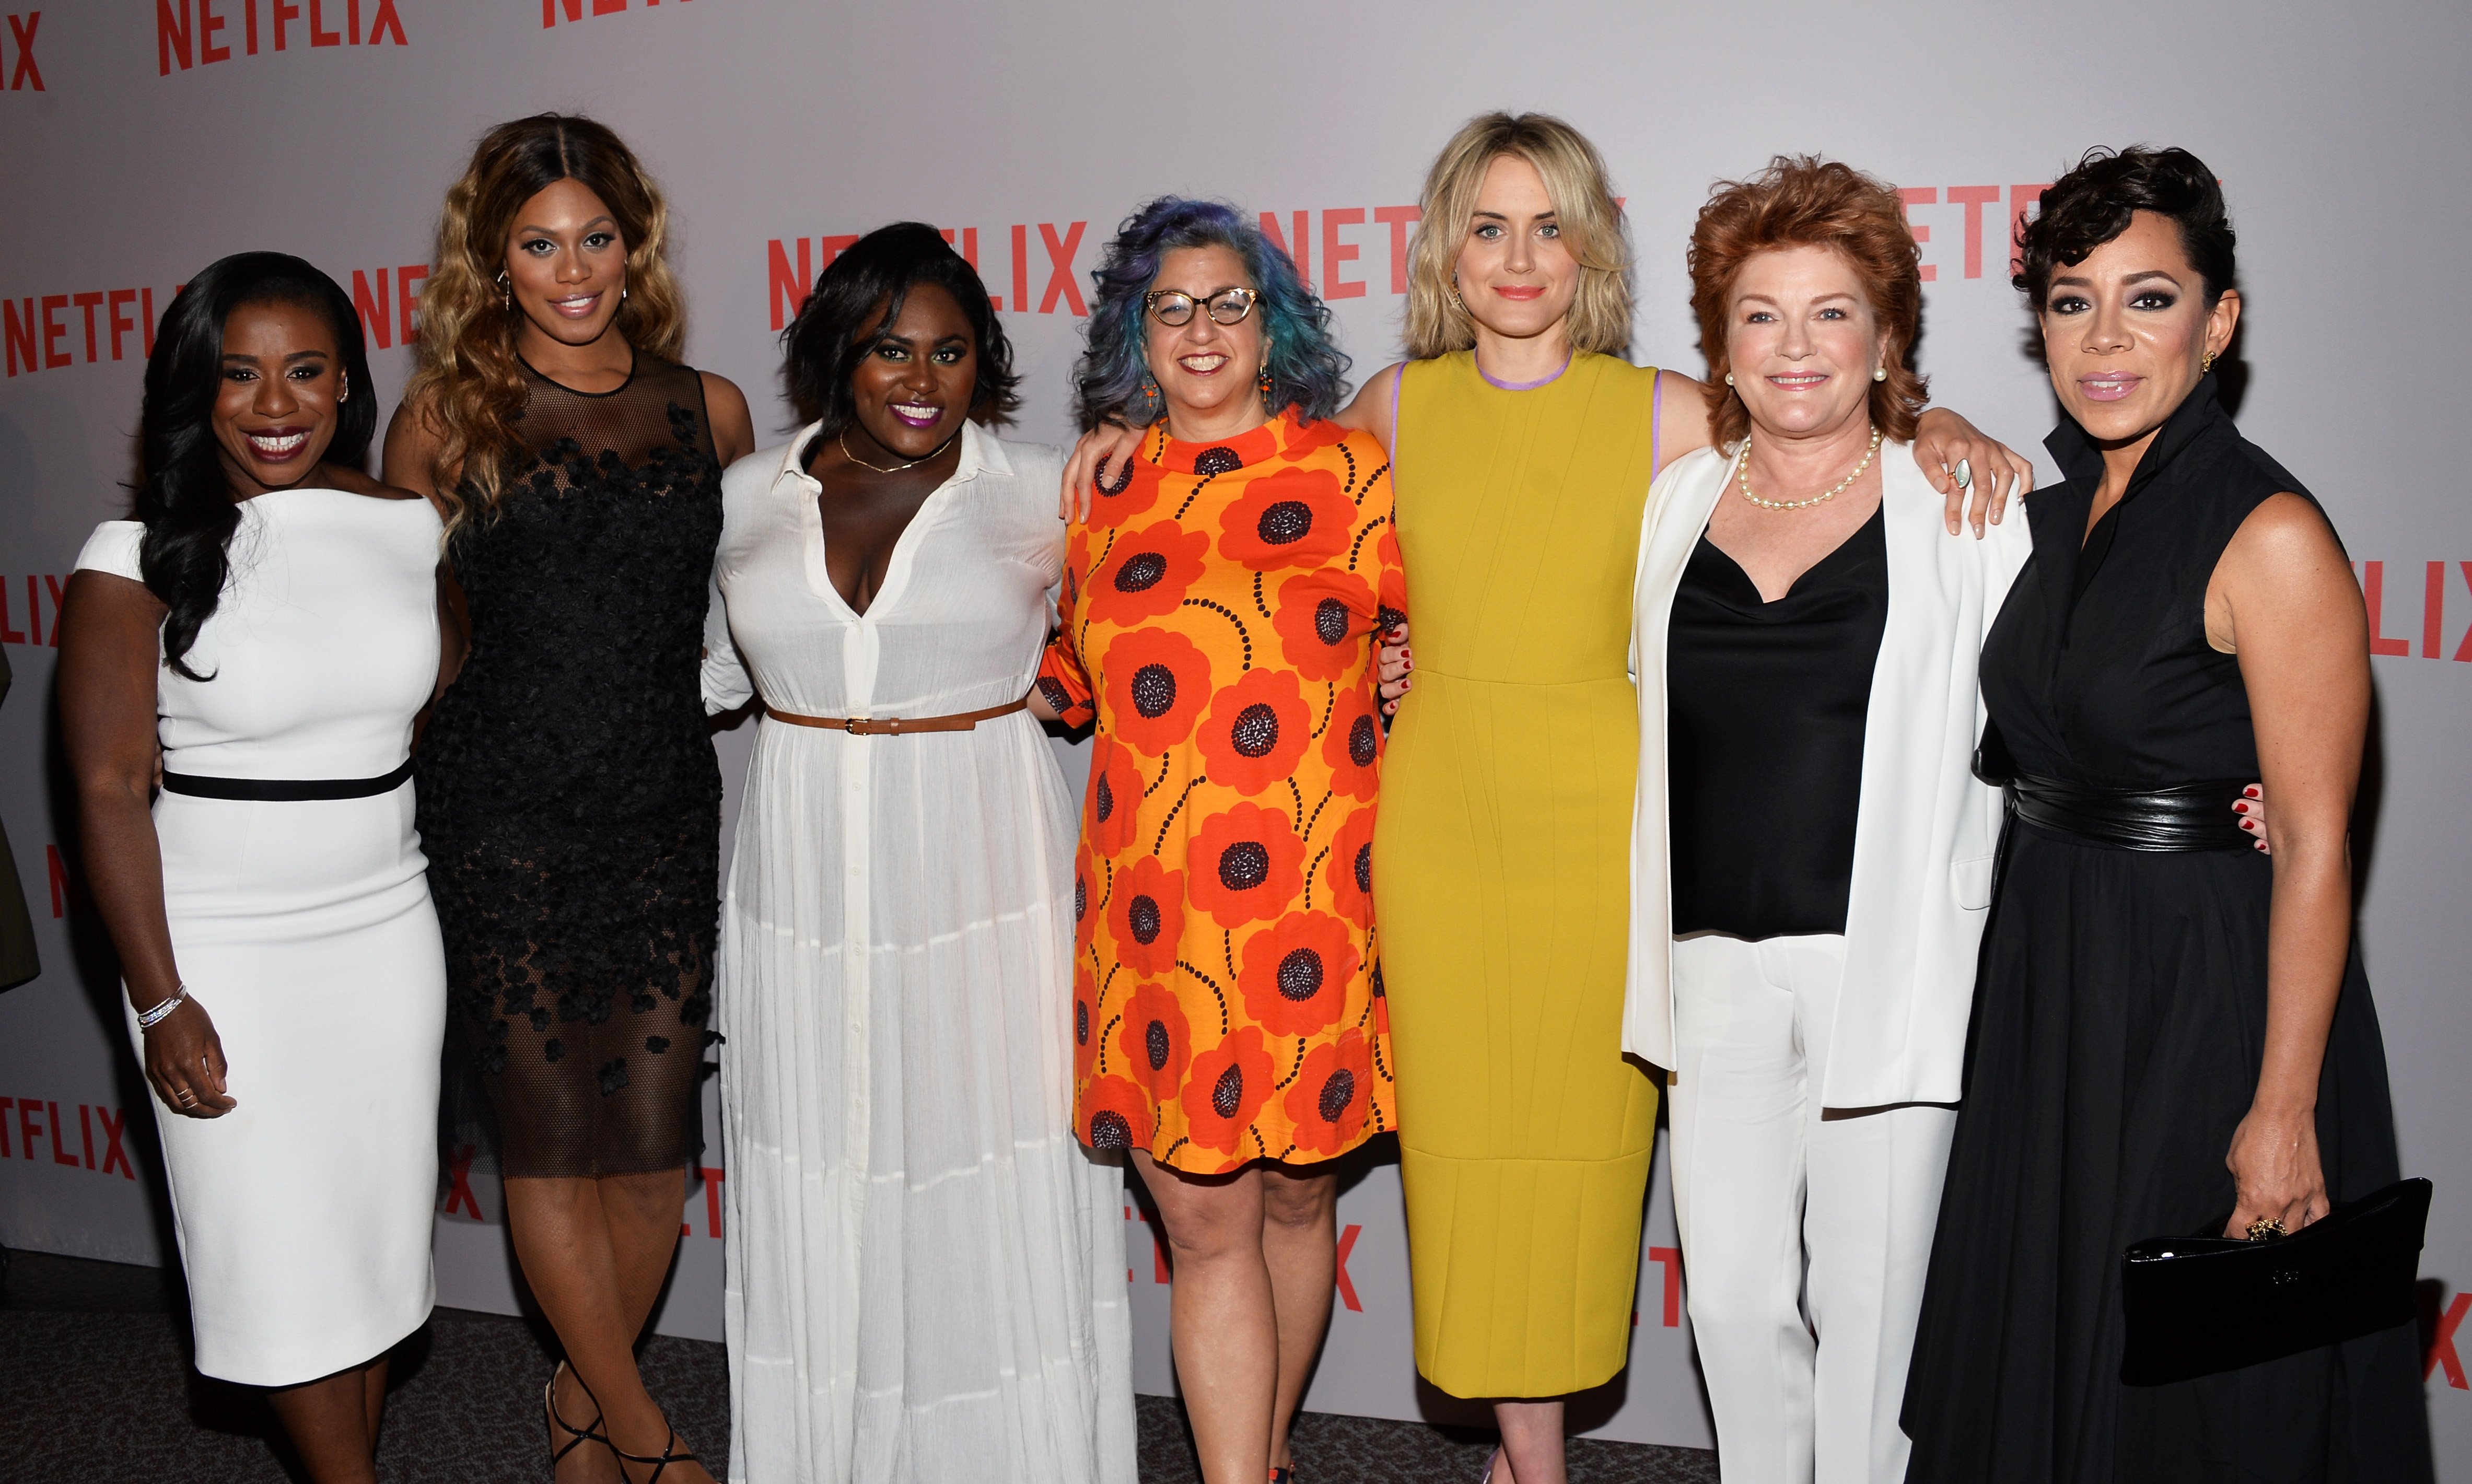 Netflix's "Orange Is The New Black" For Your Consideration Screening And Q&amp;A